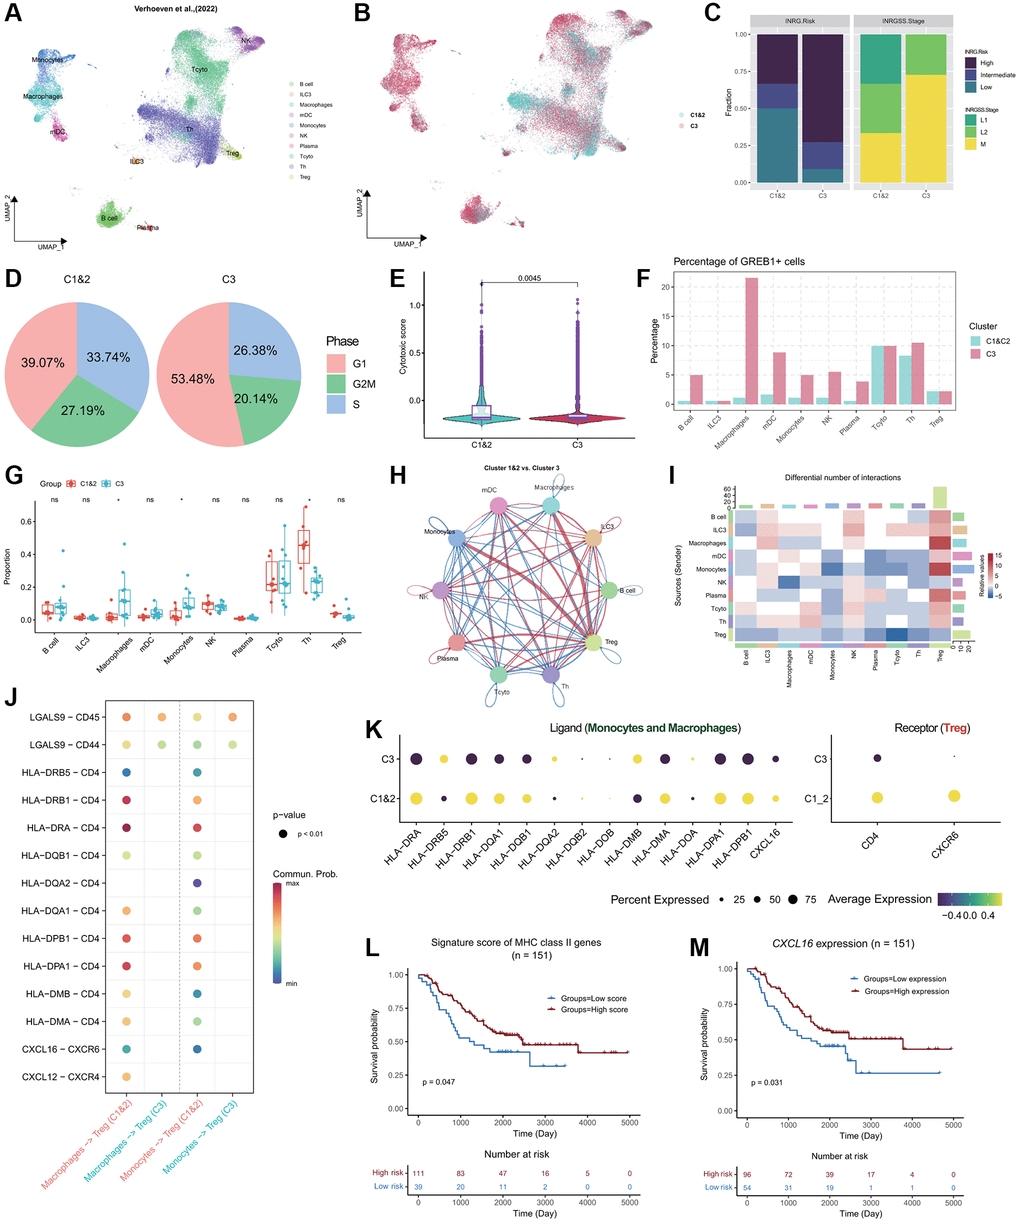 Single-cell profiling of the NB immune microenvironment and subtype-specific interactions. (A) Global overview of NB immune cell atlas containing 46,134 cells, color coded by annotated cell type (n = 17). (B) Global overview of NB immune cell atlas, color coded by predicted NB subtypes. (C) Stacked bar plots showing the distribution of Cluster 1&2 and Cluster 3 subtypes of NB patients in the INRG (left panel) and INRGSS (right panel) classifications. (D) Pie plots showing the percentage of cells in different NB subtypes in the G1, G2M, and S phases. (E) Violin plots combined with boxplots show the distribution of cytotoxic scores of cells in Cluster 1&2 and Cluster 3 subtypes. P-value was obtained from t-test. (F) Grouped bar plot showing the percentage of GREB1+ cells in different immune cell types of Cluster 1&2 and Cluster 3 patients. (G) Grouped boxplot showing the cellular proportion of Cluster 1&2 and Cluster 3 patients. P-values were obtained from t-tests. ns, not significant; *p H) Interaction map depicting the ligand-receptor interactions within the NB immune microenvironment. Red indicates stronger interactions between ligands and receptors in Cluster 1&2 compared to Cluster 3, while blue indicates weaker interactions in Cluster 1&2 compared to Cluster 3. The thickness of the lines represents the strength of the differences. (I) Heatmap showing the differences in ligand-receptor interactions between Cluster 1&2 and Cluster 3. Red indicates stronger interactions between ligands and receptors in Cluster 1&2 compared to Cluster 3, while blue indicates weaker interactions in Cluster 1&2 compared to Cluster 3. (J) Bubble plot showing the significant interactions between receptor and ligand genes among Monocytes, Macrophages, and Treg cells in both Cluster 1&2 and Cluster 3 subtypes (p K) Bubble plot showing the expression of ligands MHC II molecules and CXCL16 in Monocytes and Macrophages of both Cluster 1&2 and Cluster 3 subtypes, as well as the expression of receptor genes CD4 and CXCR6 in Treg cells. (L) KM curve showing the stratification derived by the signature score of MHC Class II genes exhibiting significant differences in prognosis. P-value was obtained by log-rank test. (M) KM curve showing the stratification derived by the expression of CXCL16 exhibiting significant differences in prognosis. P-value was obtained by log-rank test.